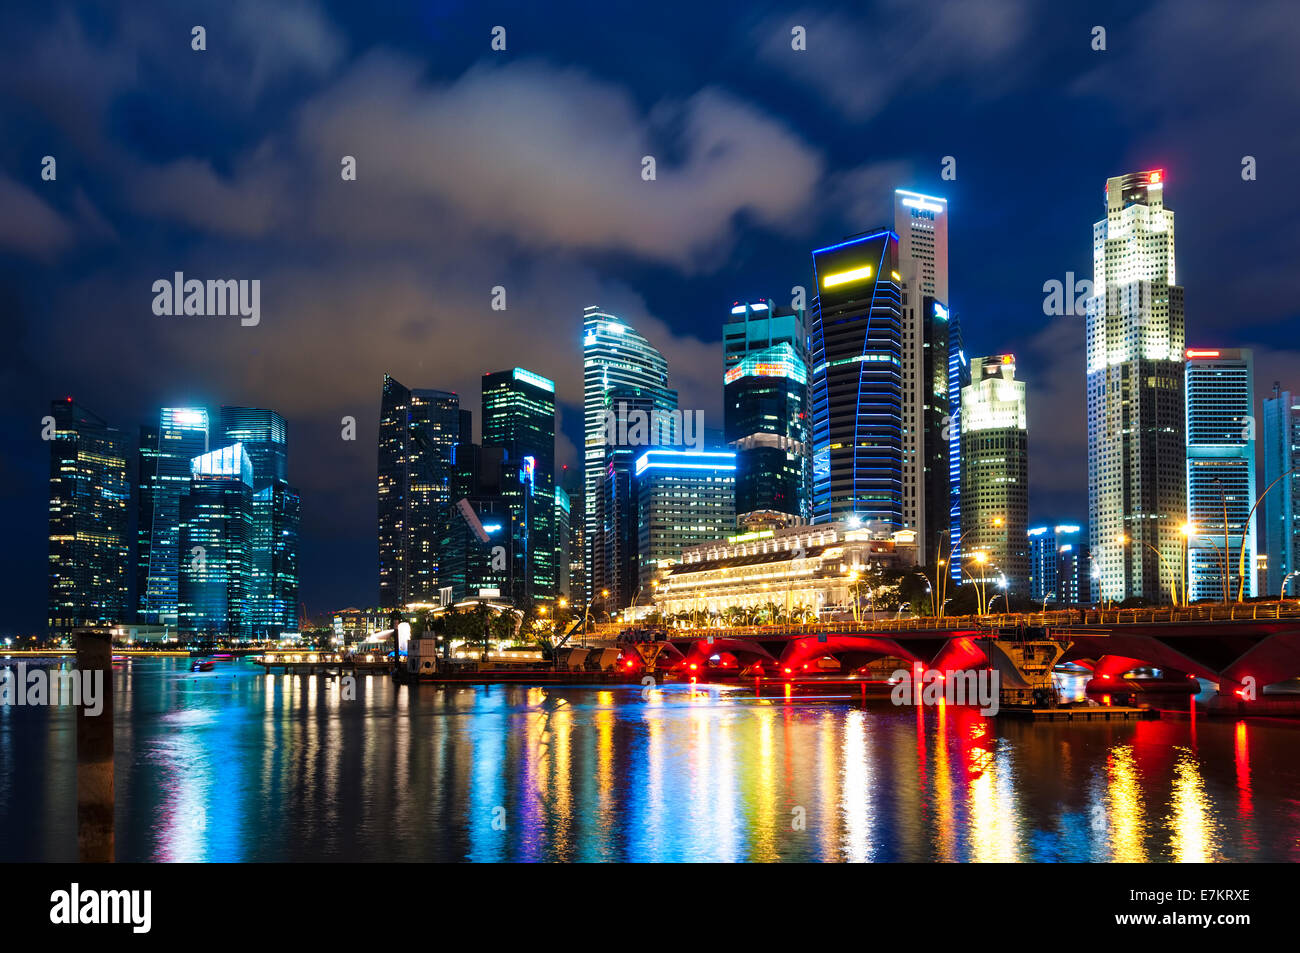 The skyline of downtown Singapore at night. Stock Photo